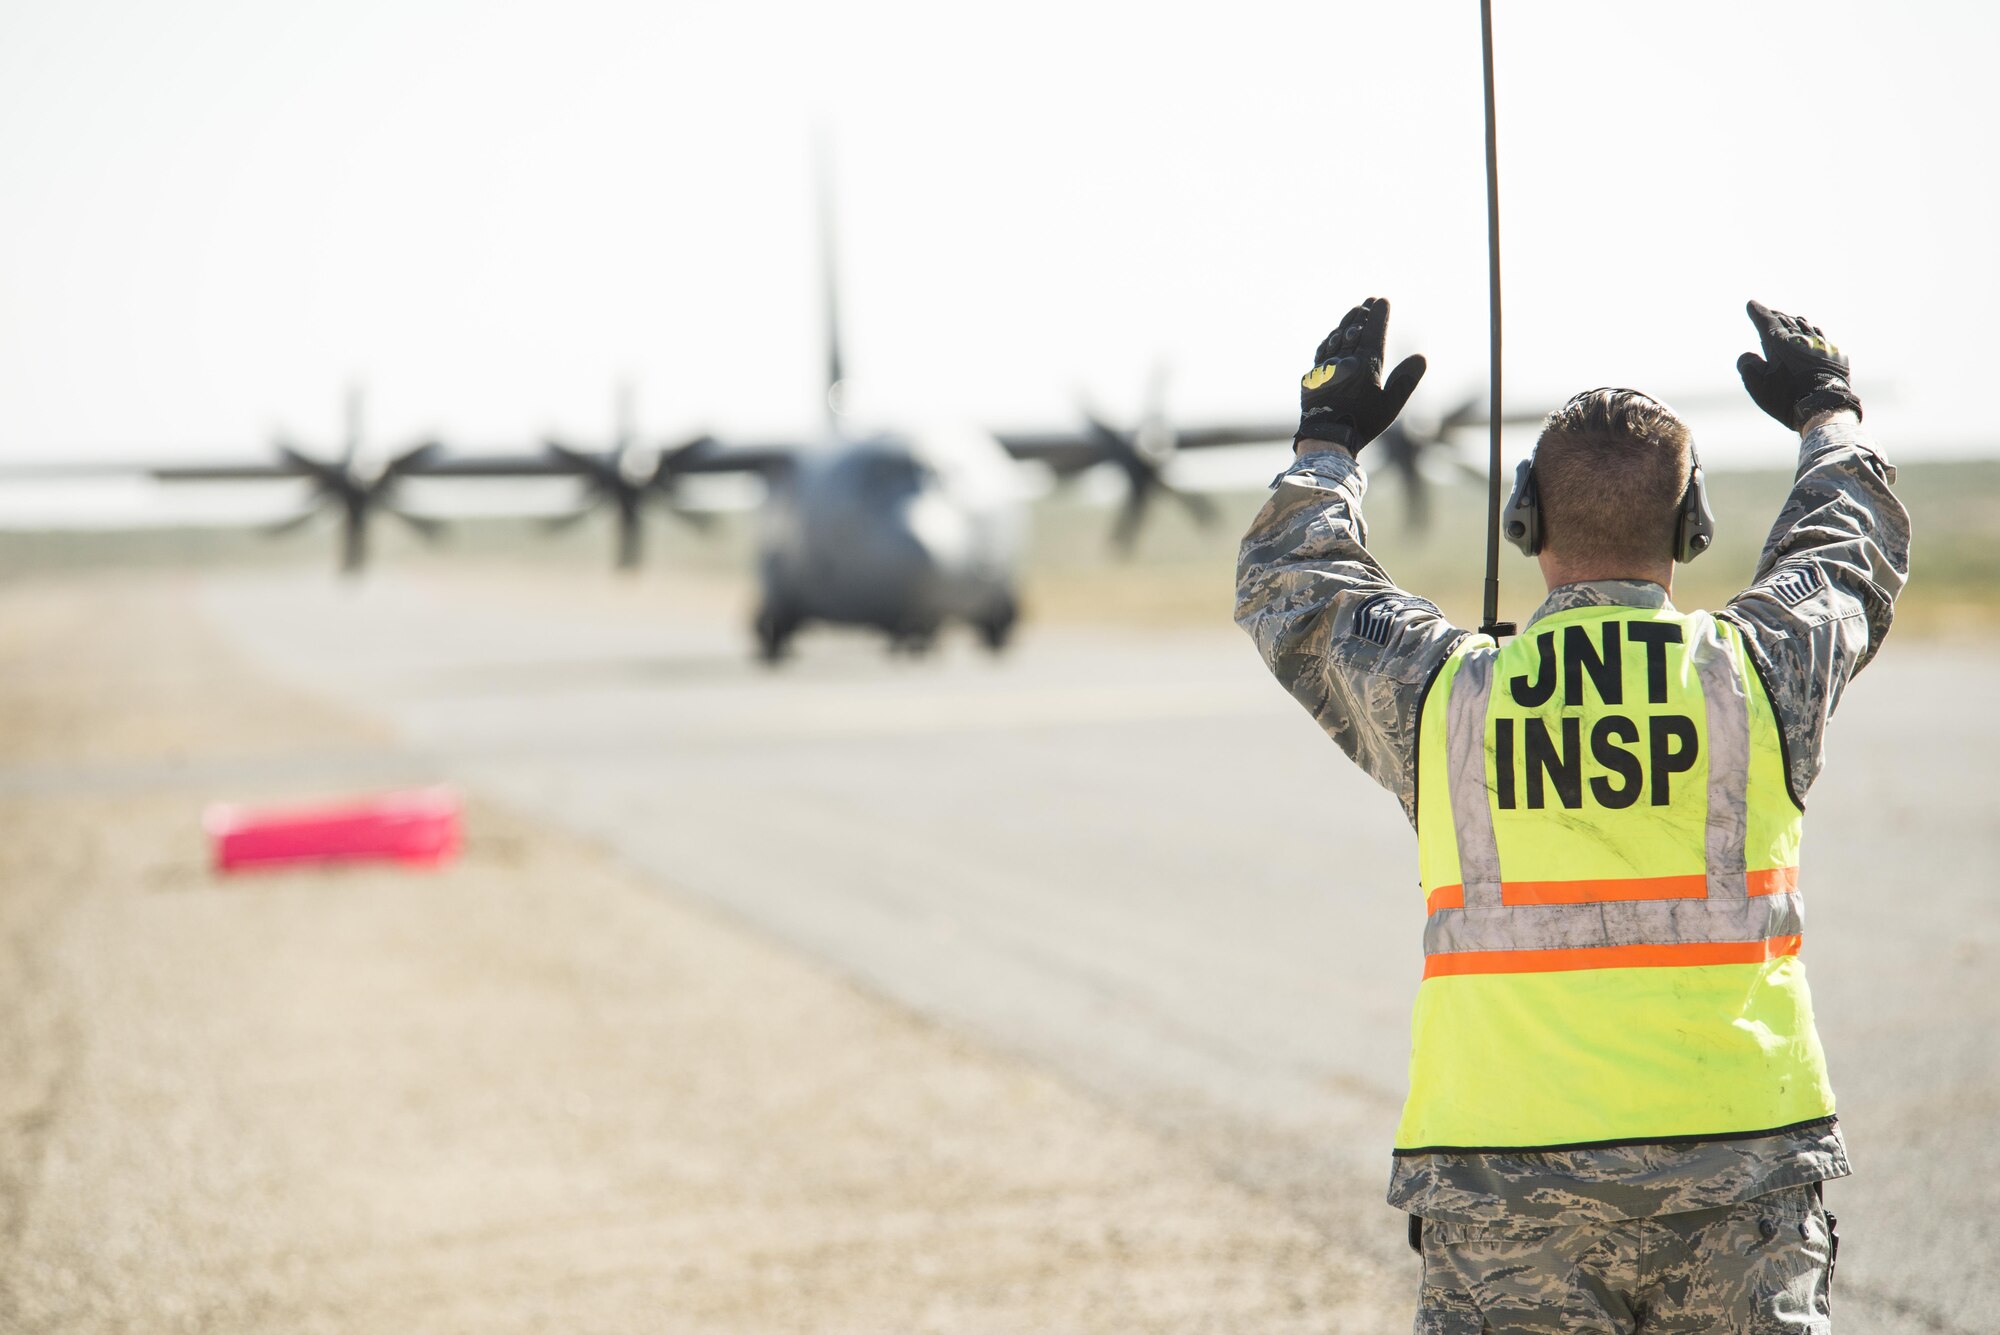 Tech. Sgt. Attila Csipes, 49th Logistics Readiness Squadron Small Air Terminal non commissioned officer in charge, marshals a C-130 Hercules down the runway of White Sands Missile Range's Condron Airfield N.M., for Vigilant Shield 18 on Oct. 31, 2017.  This exercise tests the response and deployment capabilities of Airmen and Soldiers. The aircraft based out of Littlerock AFB, Ark., flew equipment in from Fort Drum, N.Y., to support the 10th Mountain Division Soldiers that will take part in the exercise.  (U.S. Air Force photo by Tech. Sgt. Jeff Howerton)